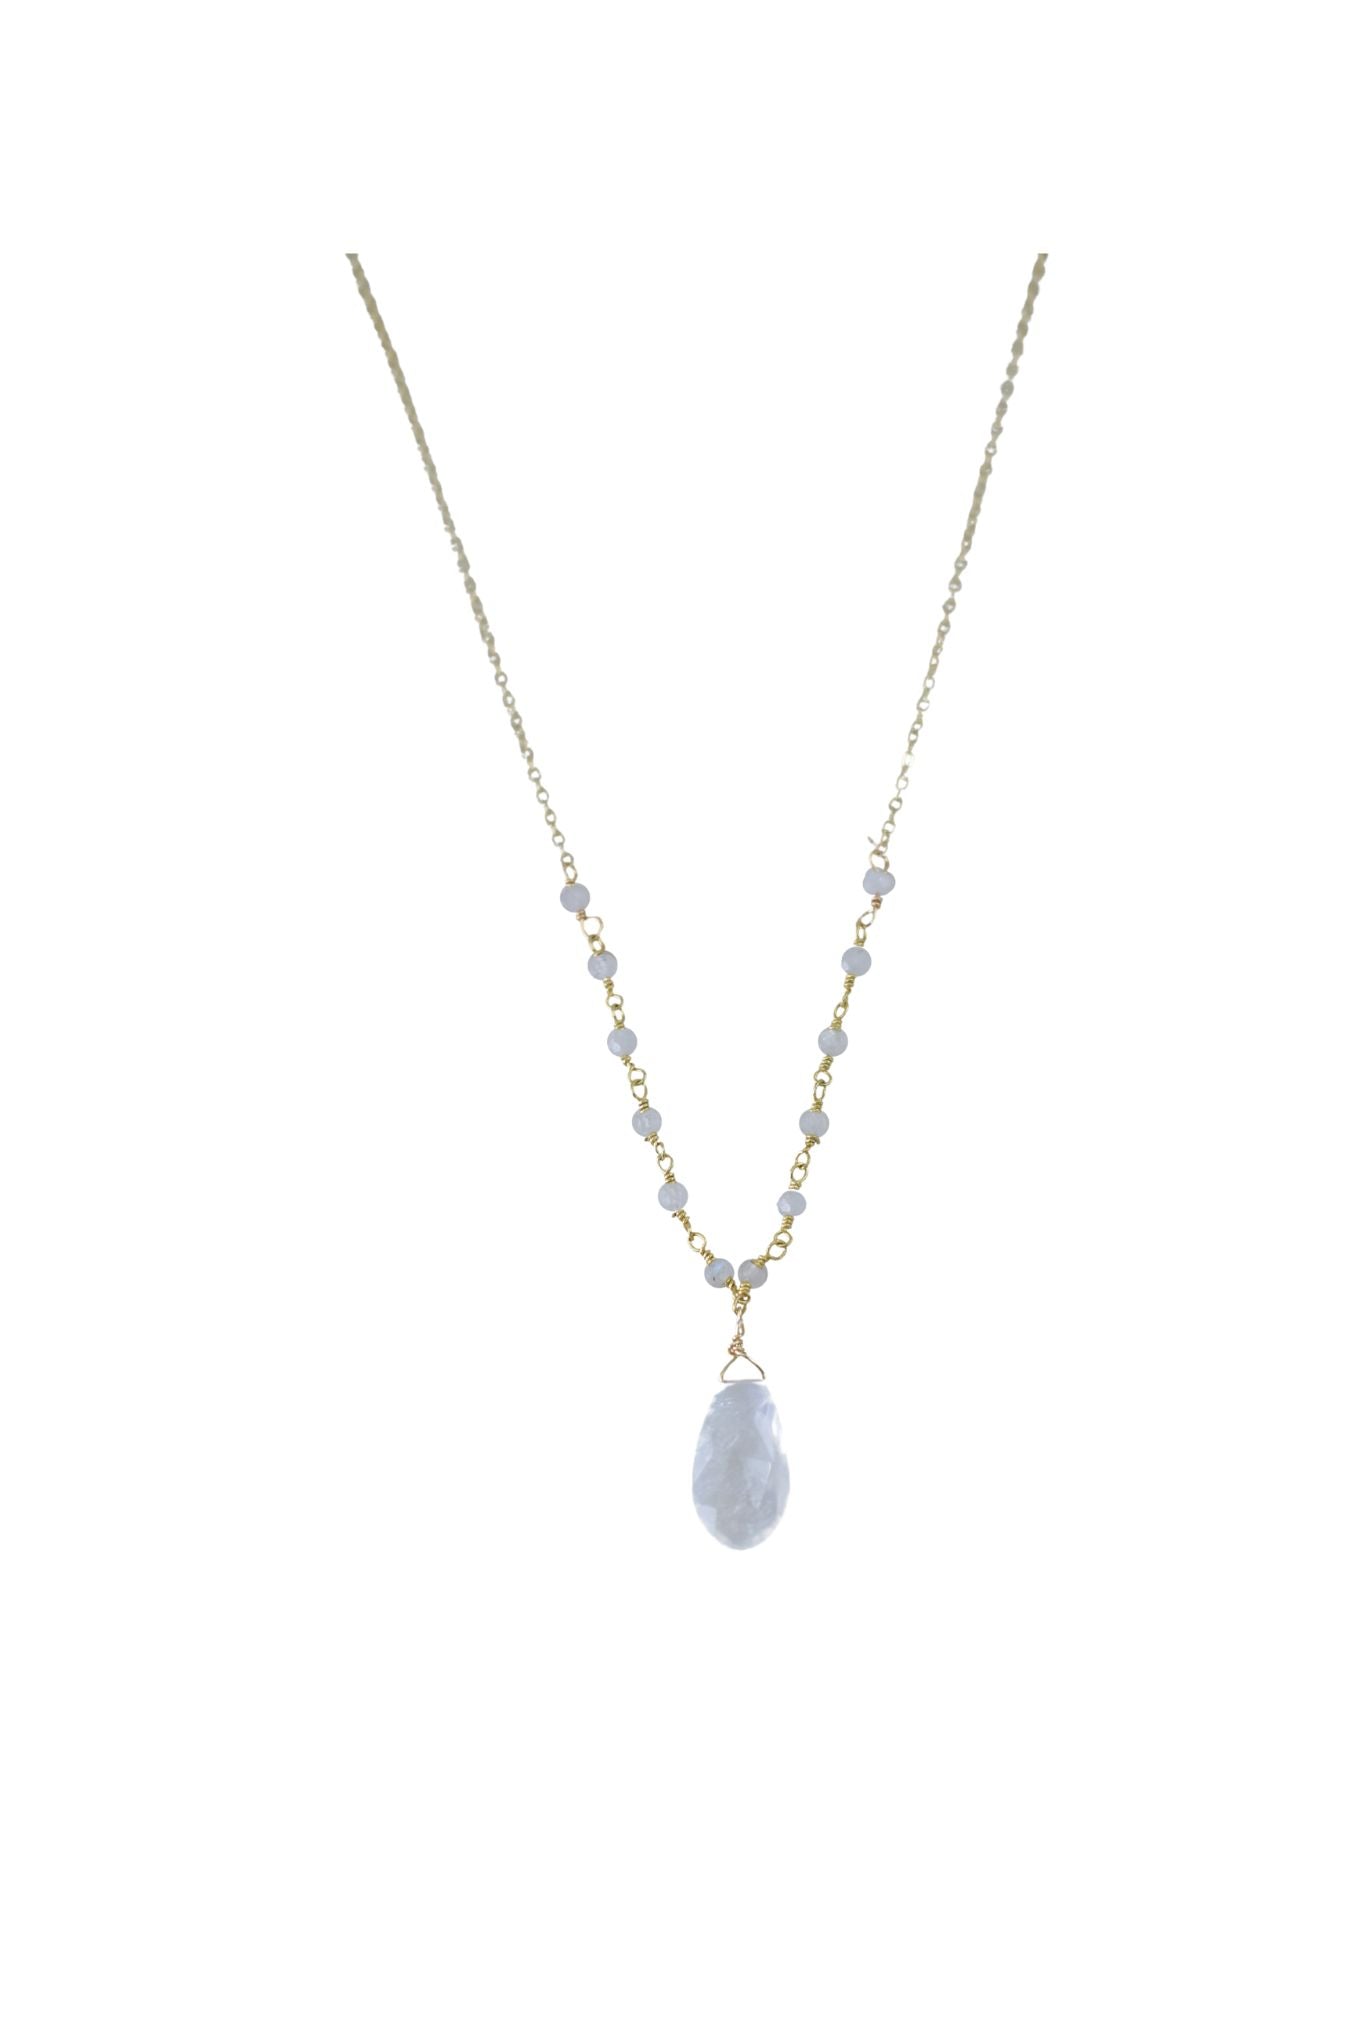 Beaded Bailey Necklace in Moonstone